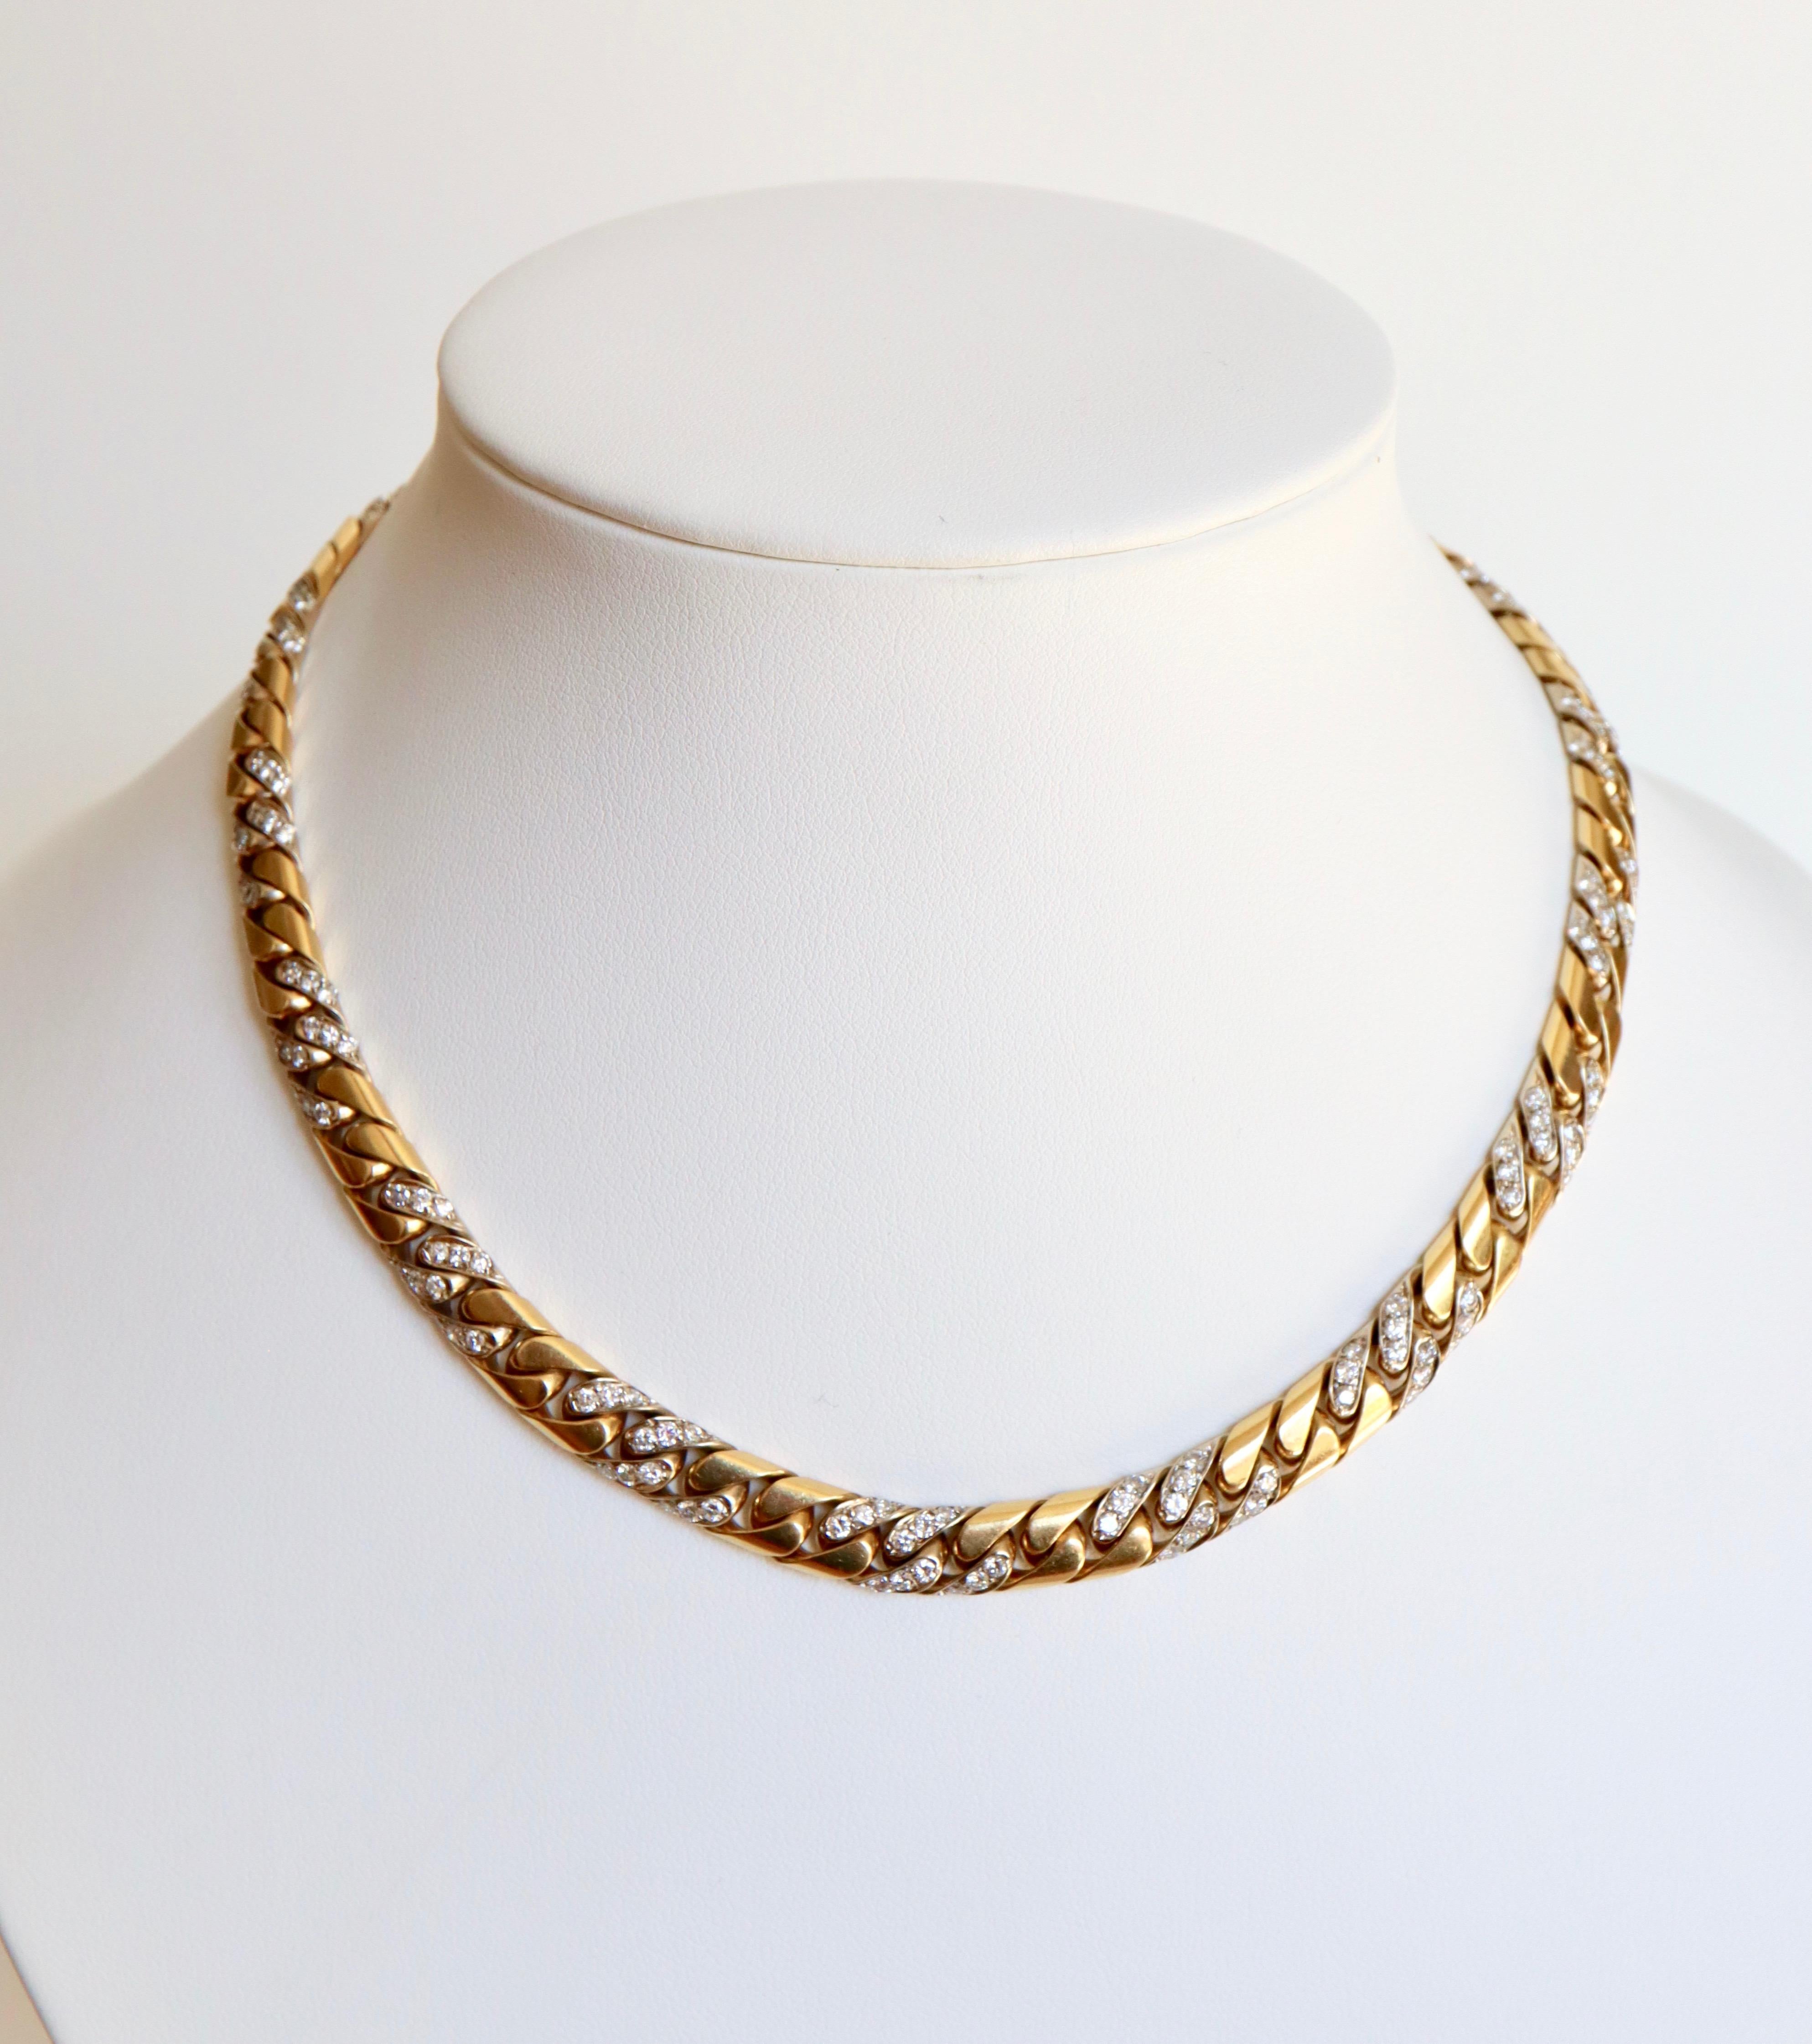 FRED Necklace in 18K yellow gold and diamonds Gourmette link, 28 links of which are each paved with 6 diamonds for a total weight of approximately 3 carats.
Signed: Fred Paris 
Length: 40cm Width: 6mm
Gross weight: 83g